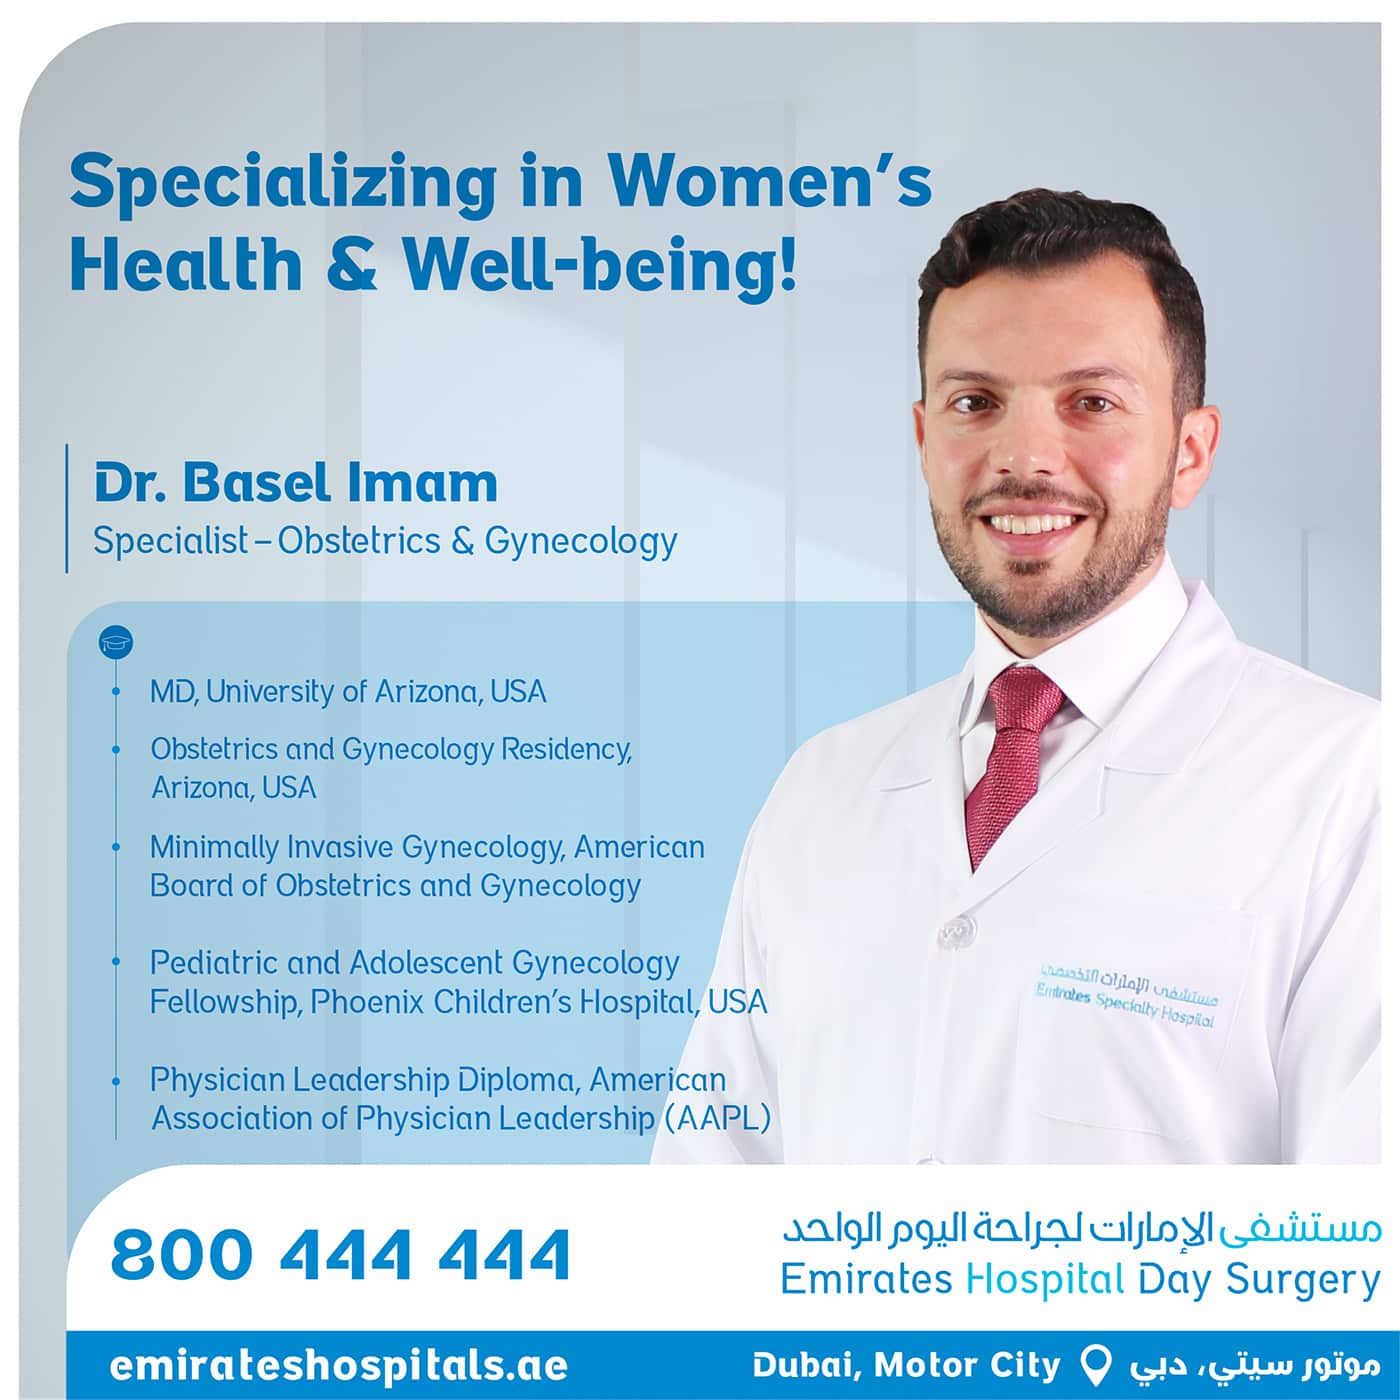 Dr. Basel Imam, Specialist – Obstetrics & Gynecology Joined Emirates Hospital Day Surgery, Motor City